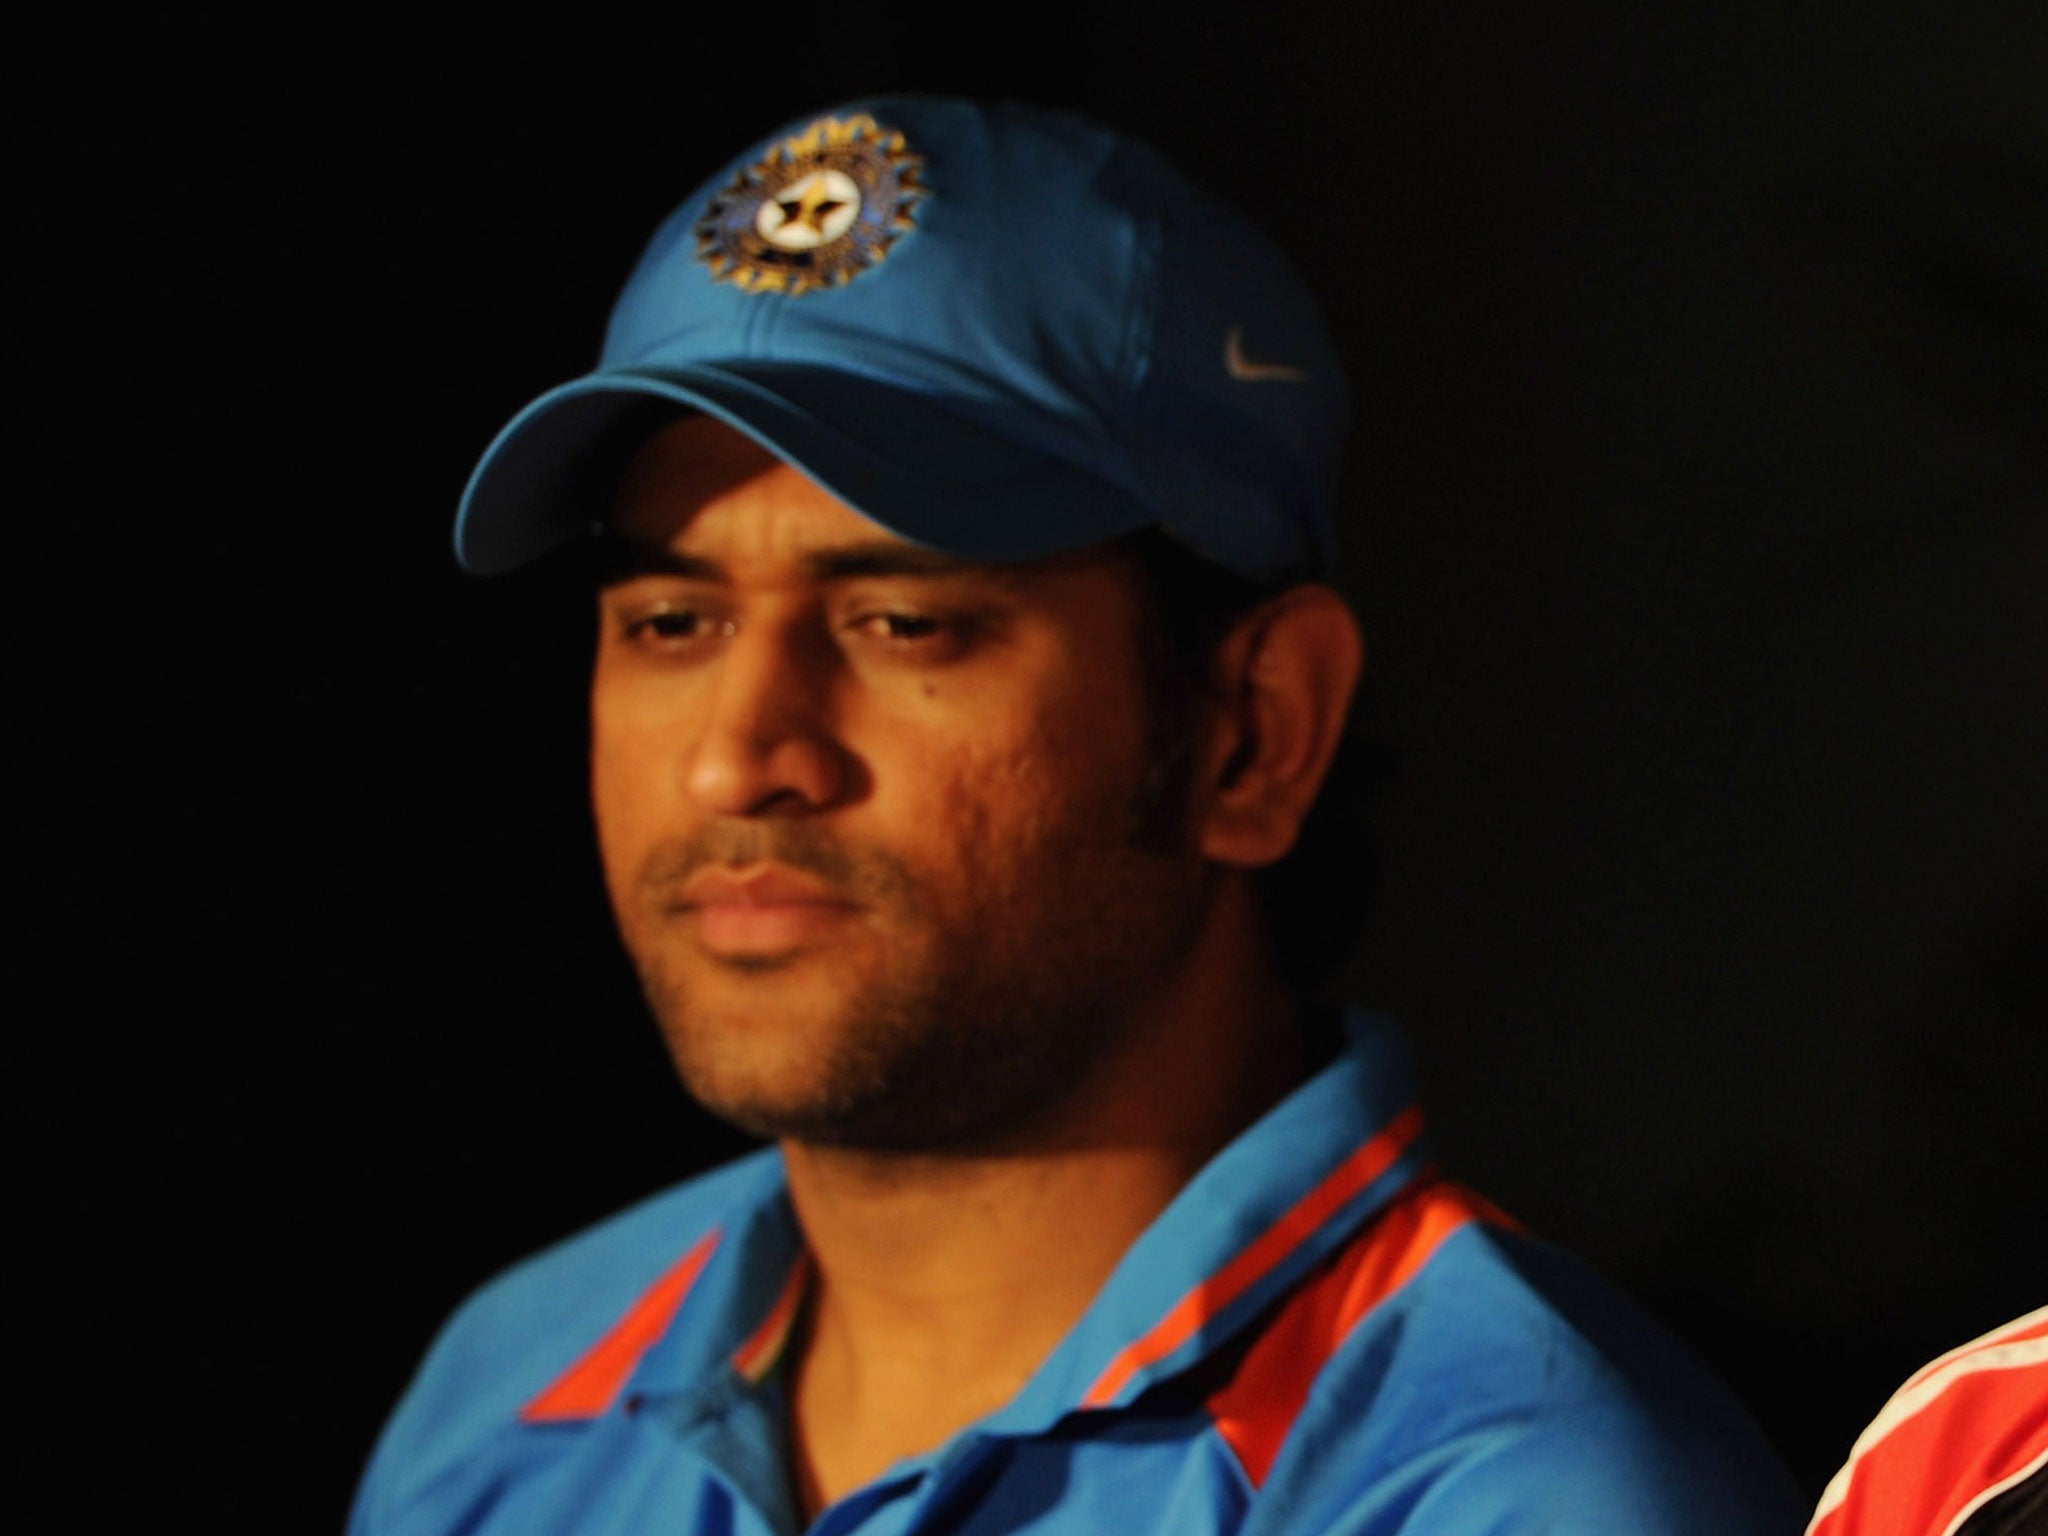 Dhoni had already created a flutter of sorts by walking out ahead of Ravindra Jadeja